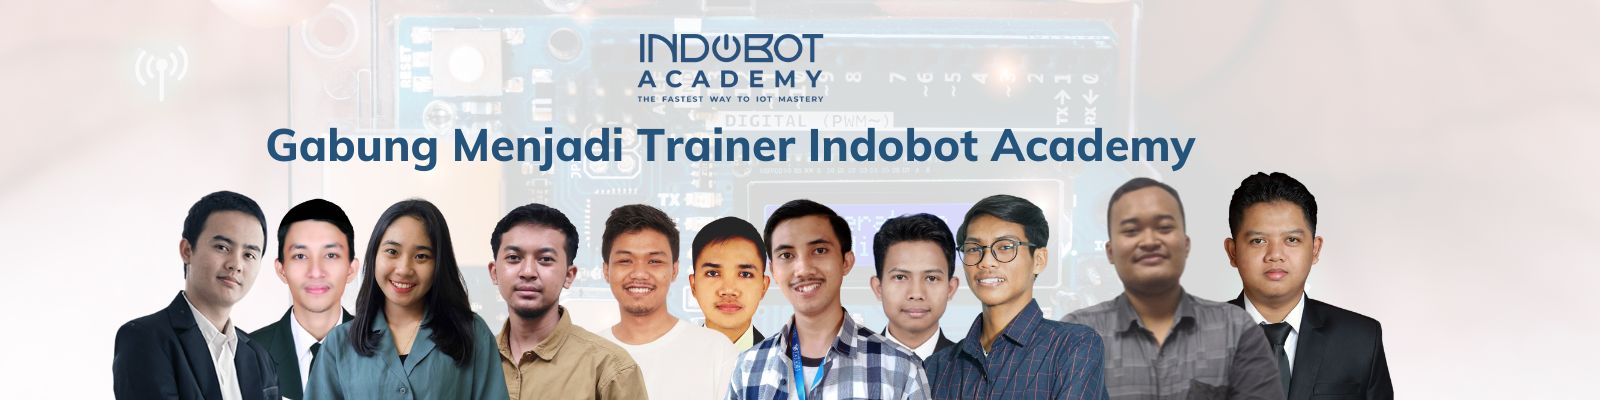 Lowongan Trainer Indobot Academy